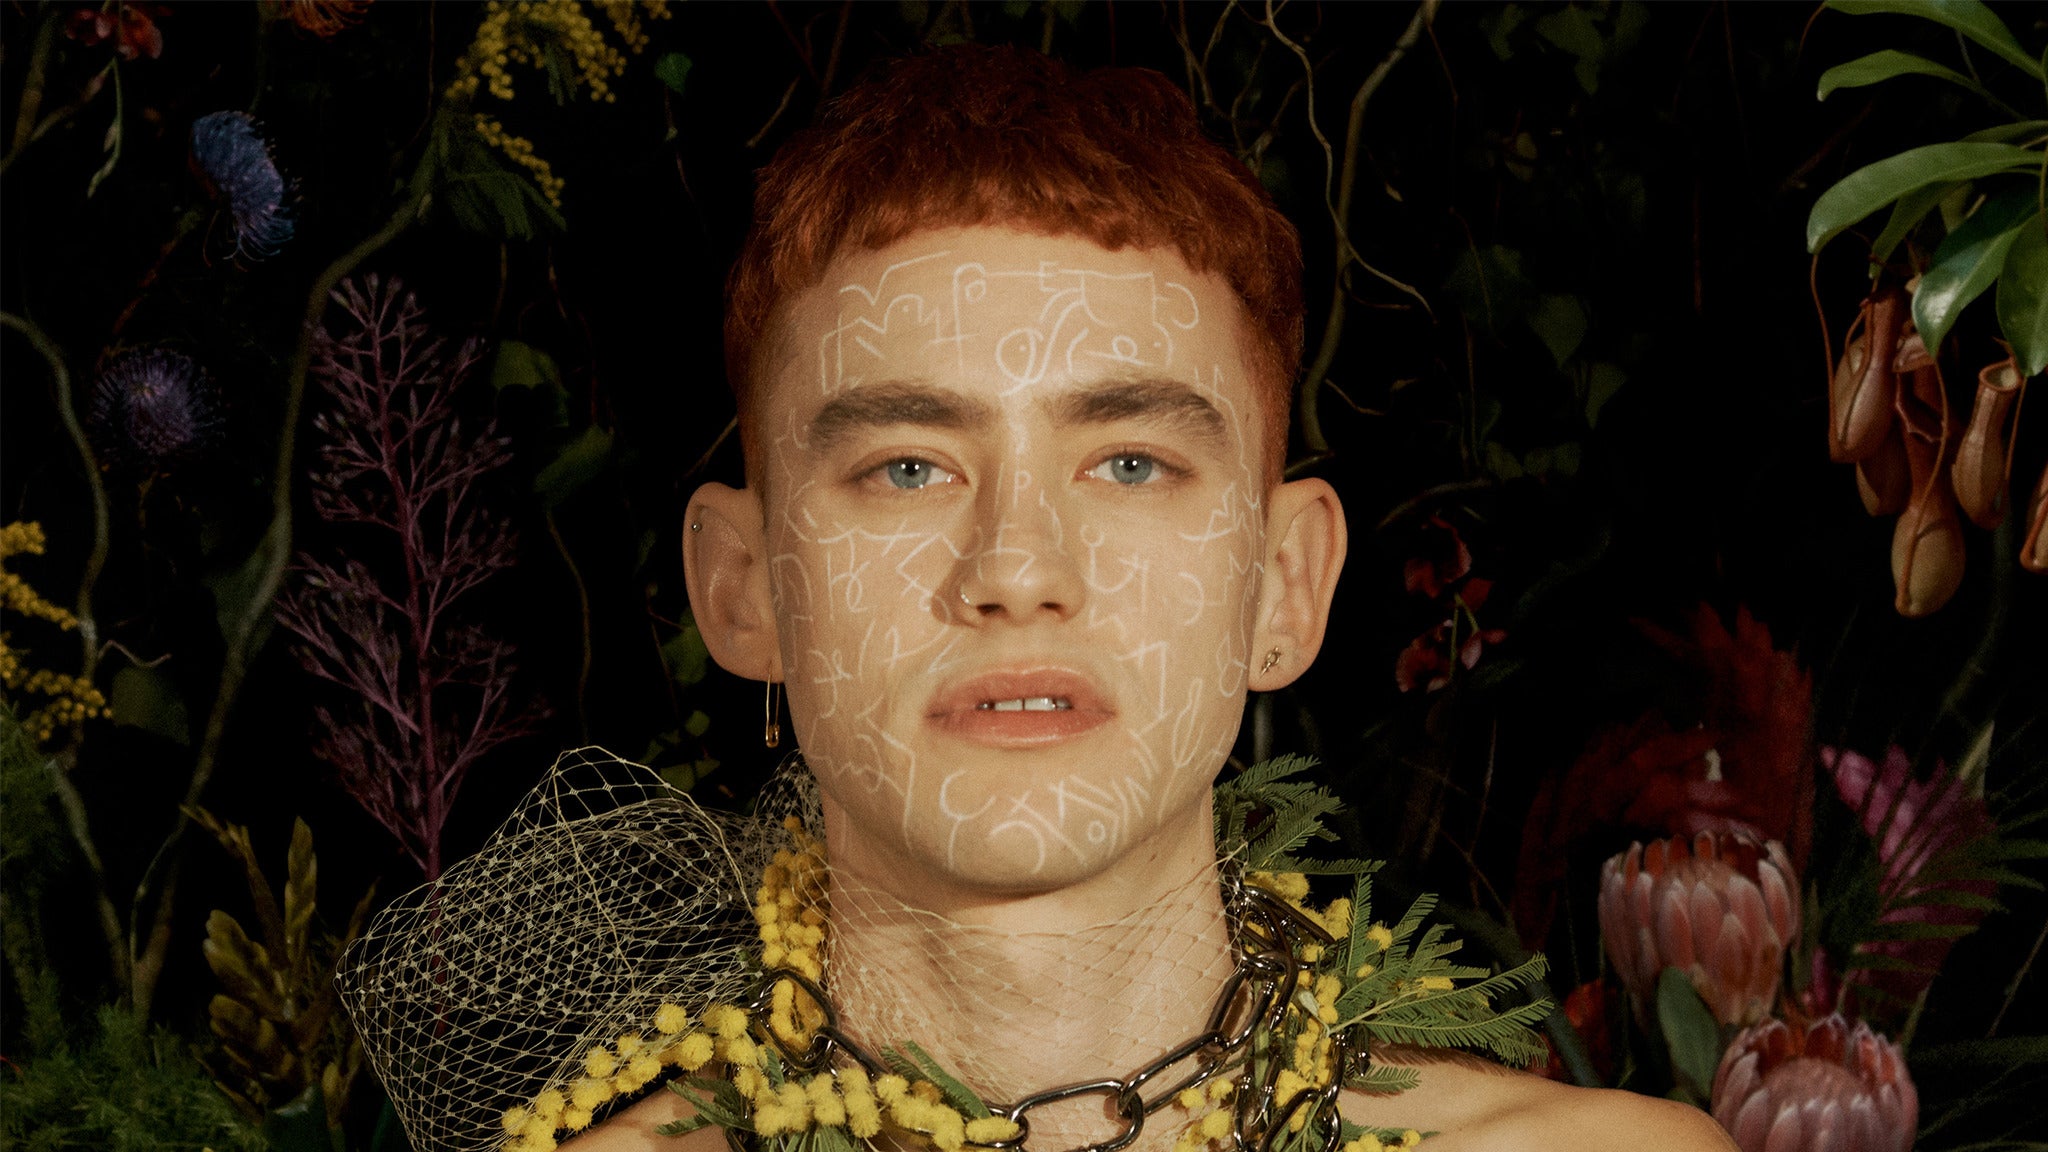 Years & Years in Los Angeles promo photo for Live Nation Mobile App presale offer code